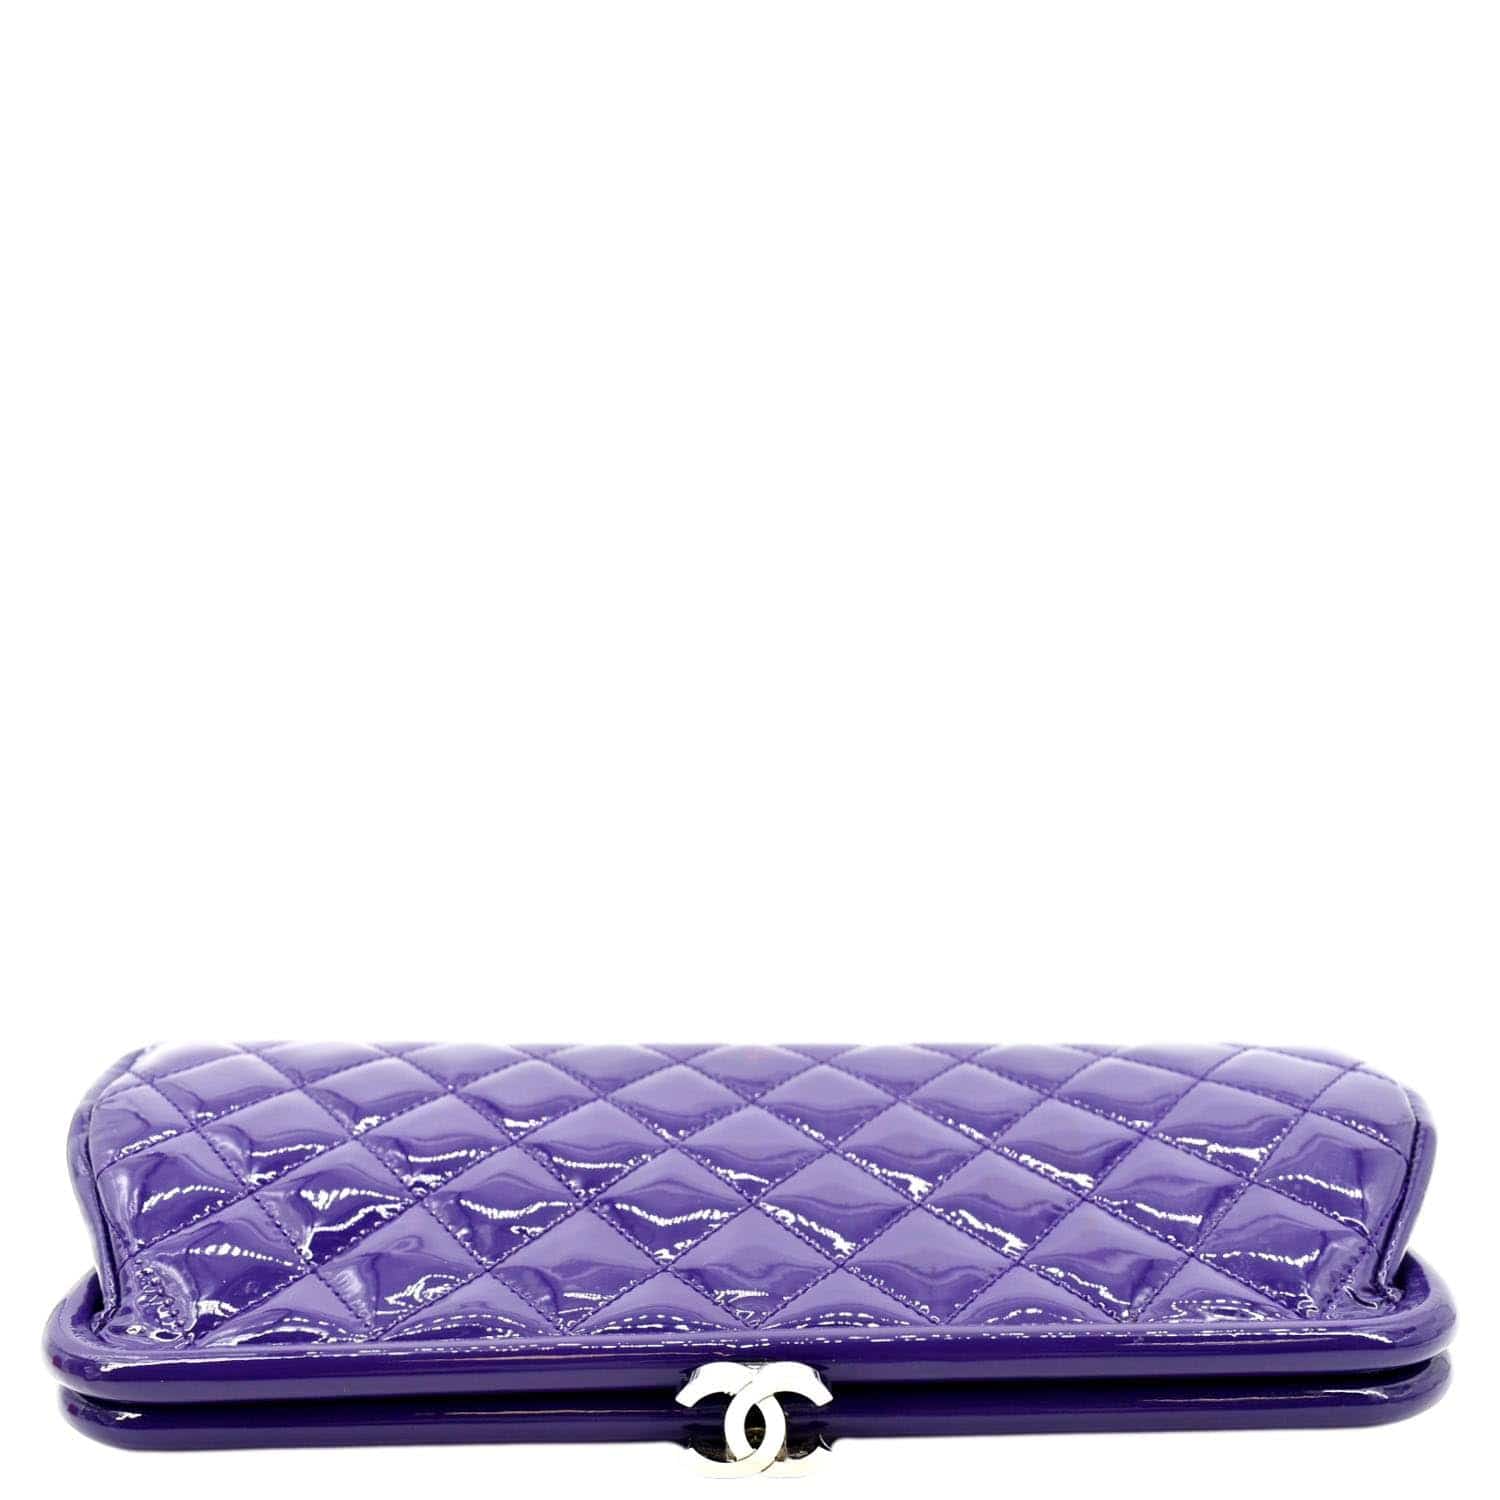 CHANEL Timeless Quilted Patent Leather Clutch Bag Purple